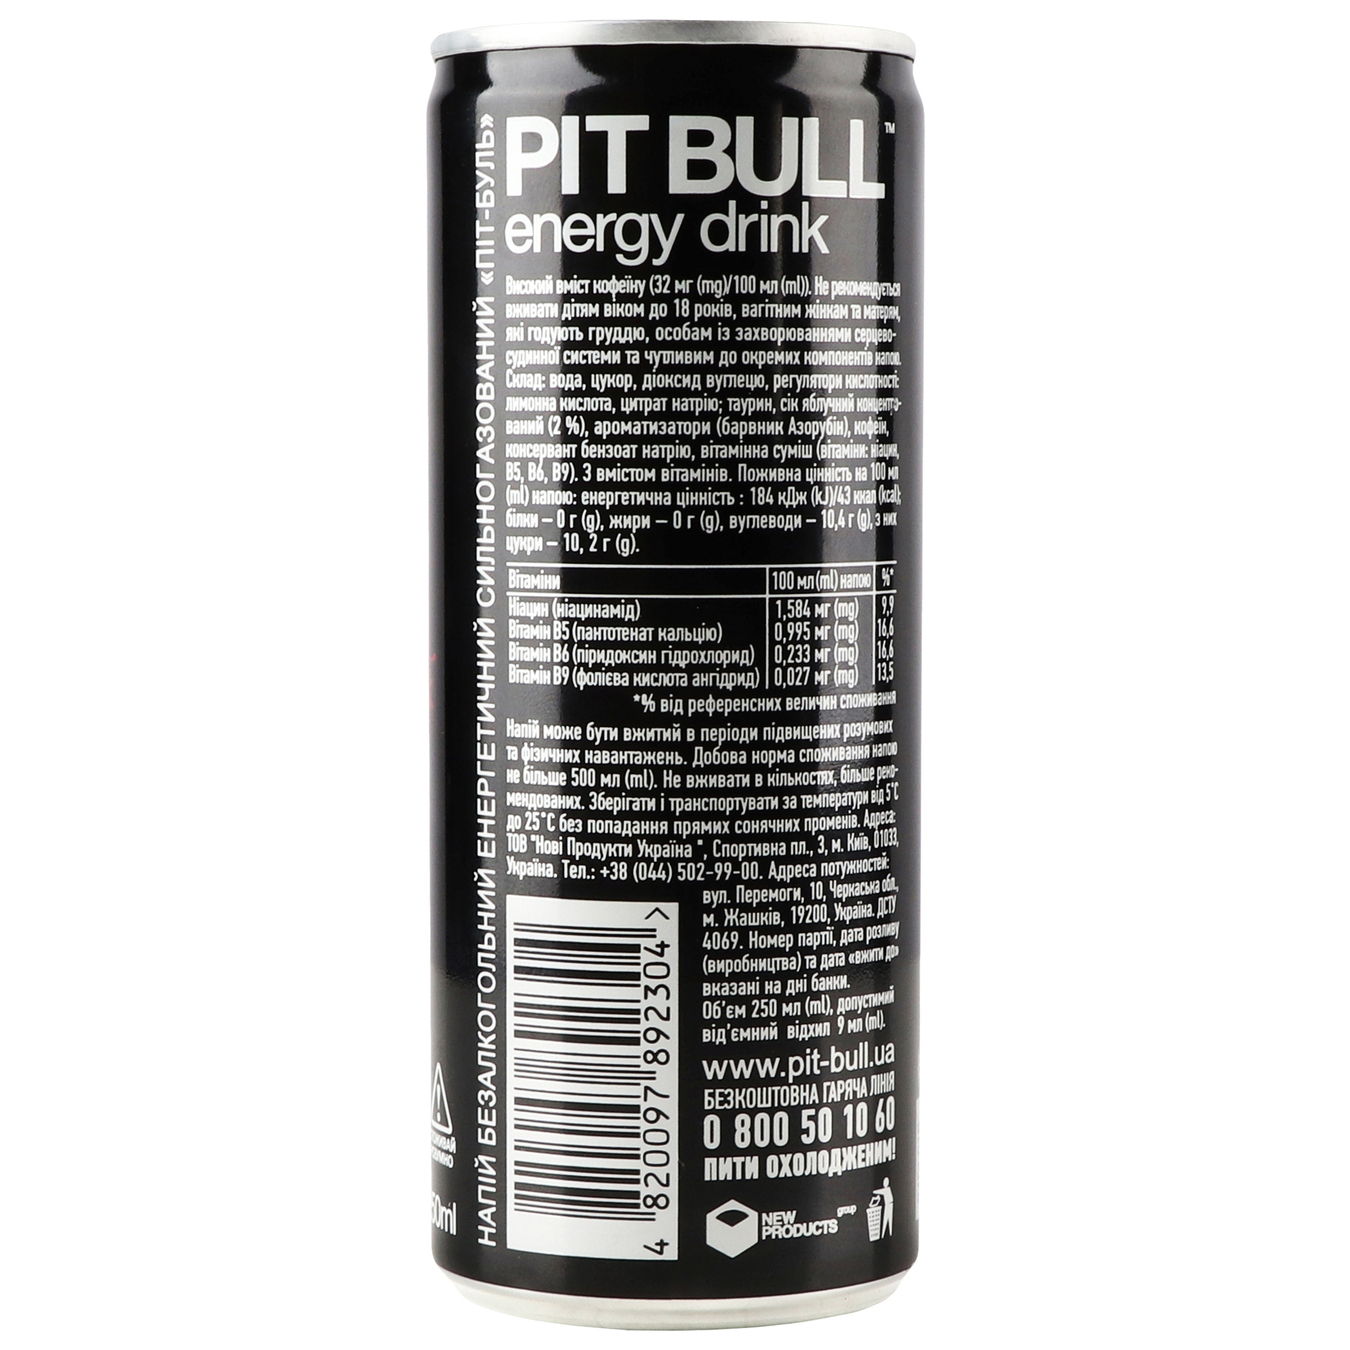 Pit Bull energy drink 0.25 l iron can 2